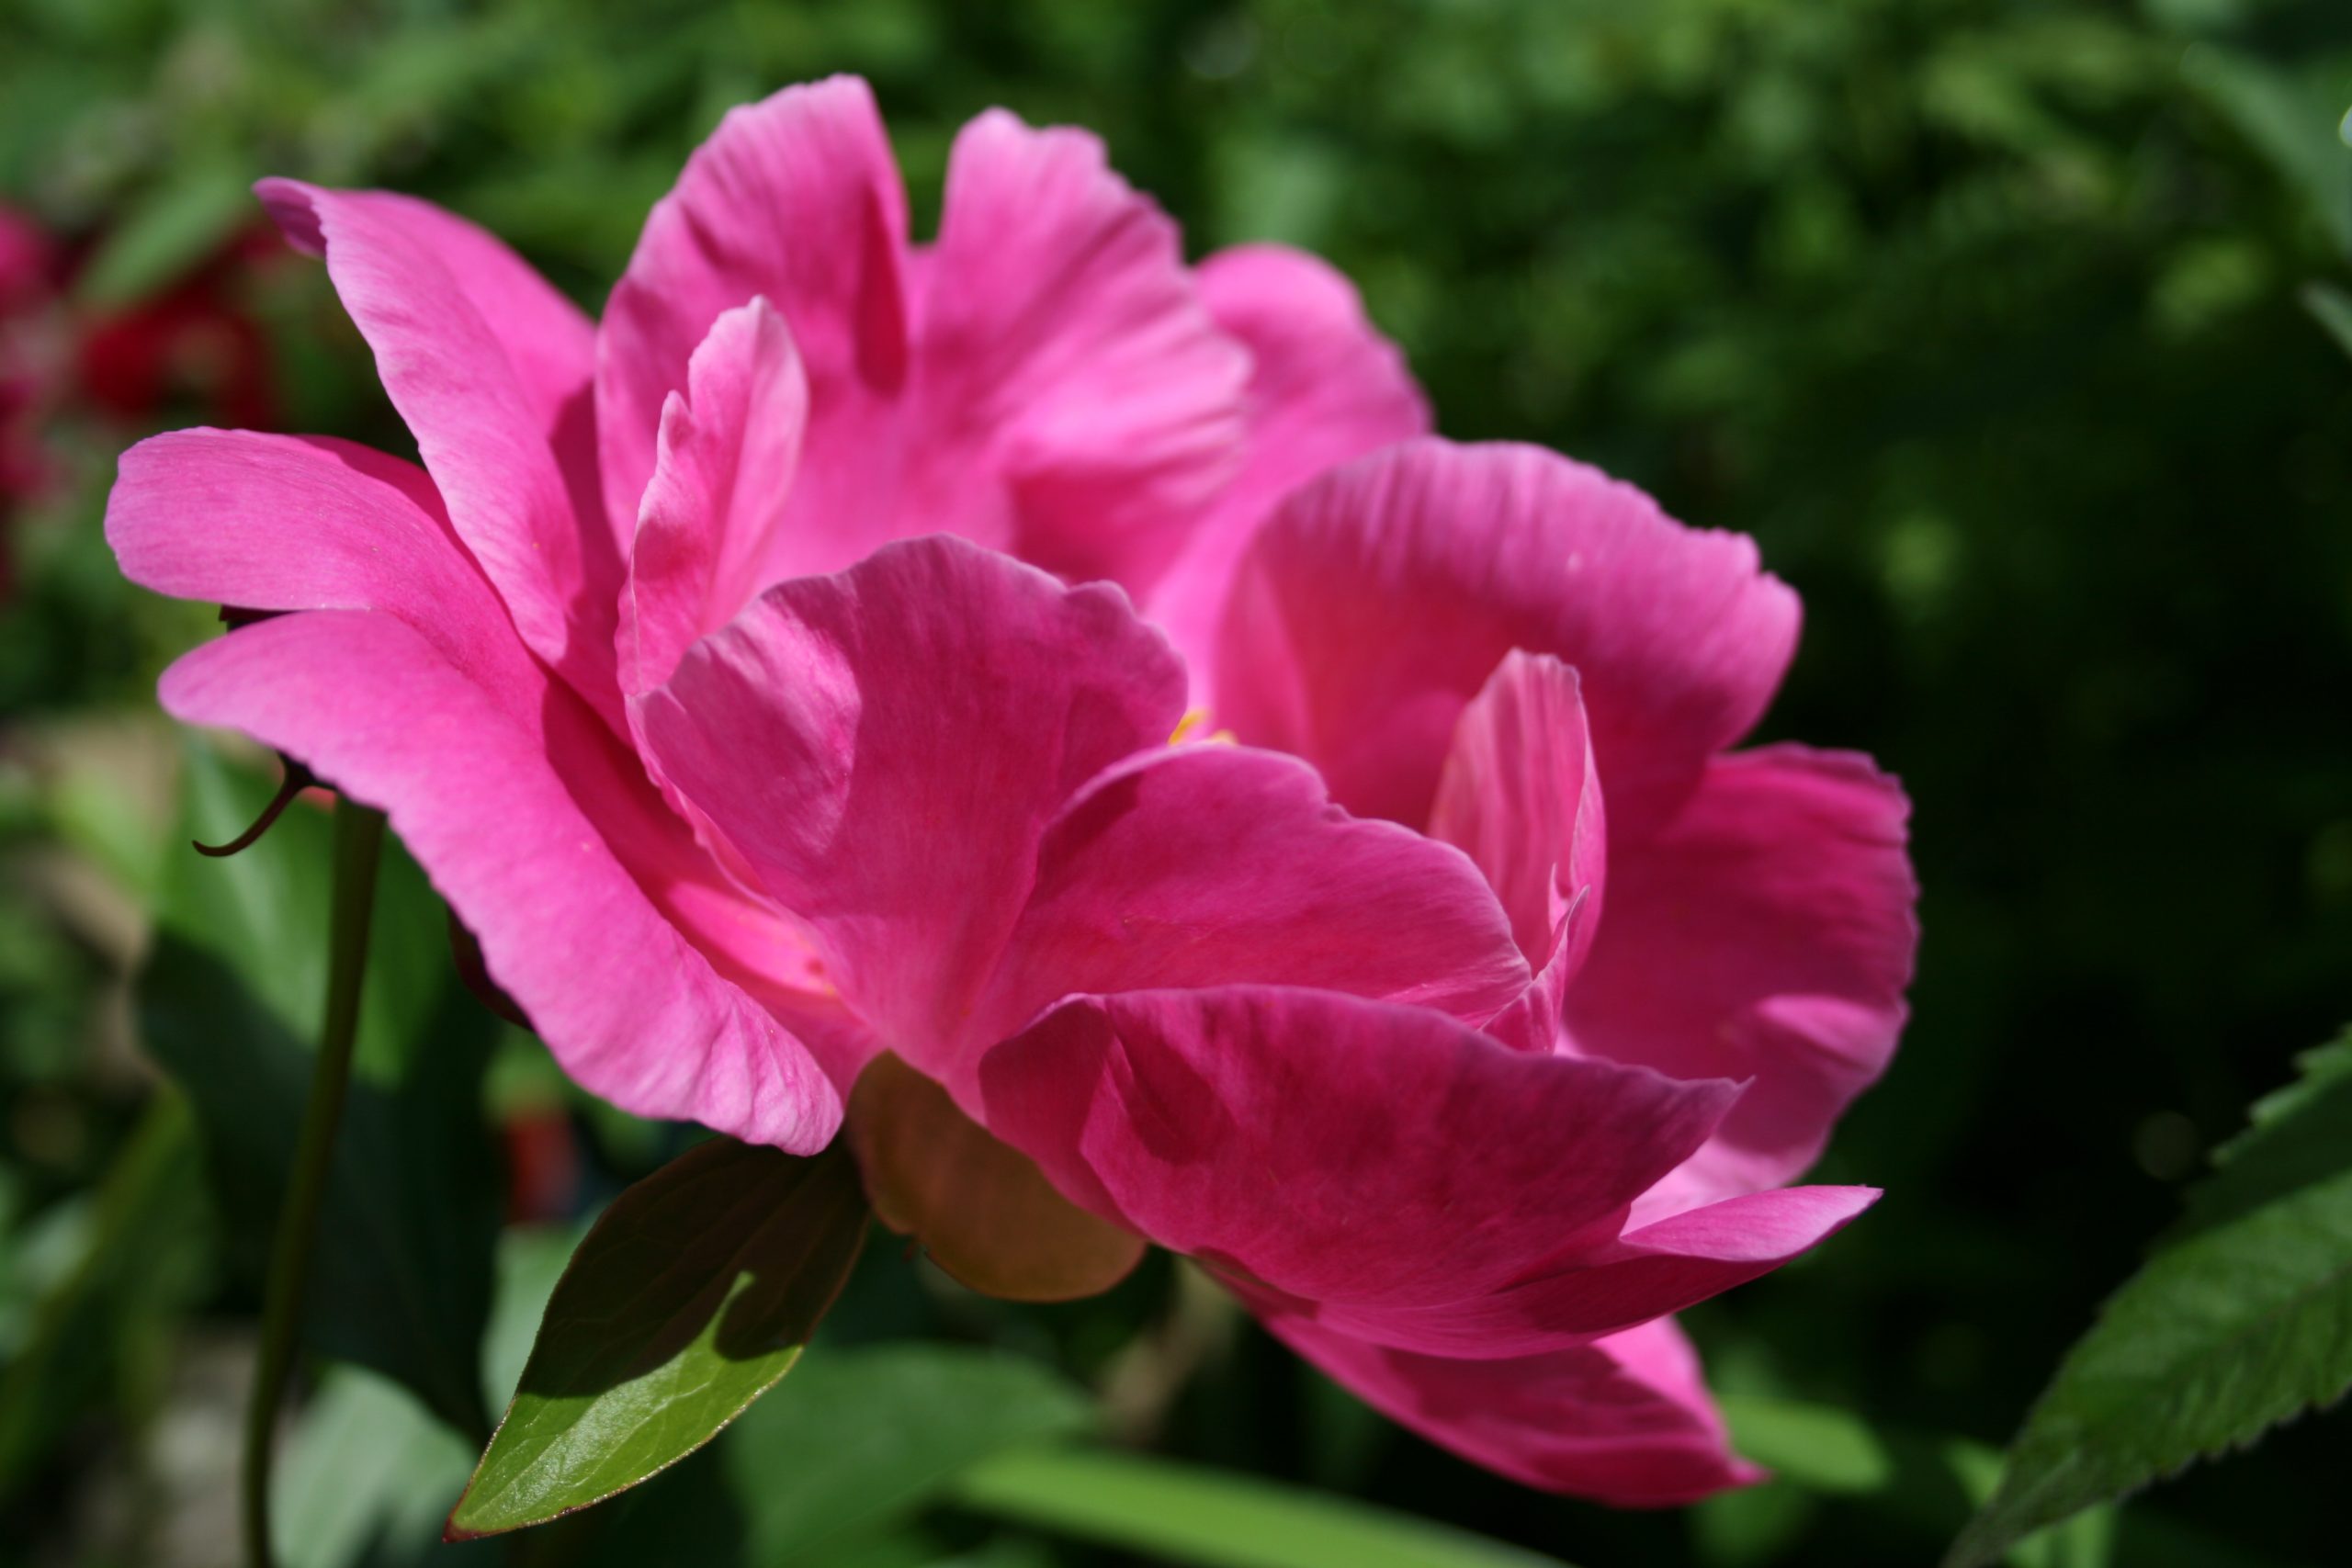 Peony (user submitted)